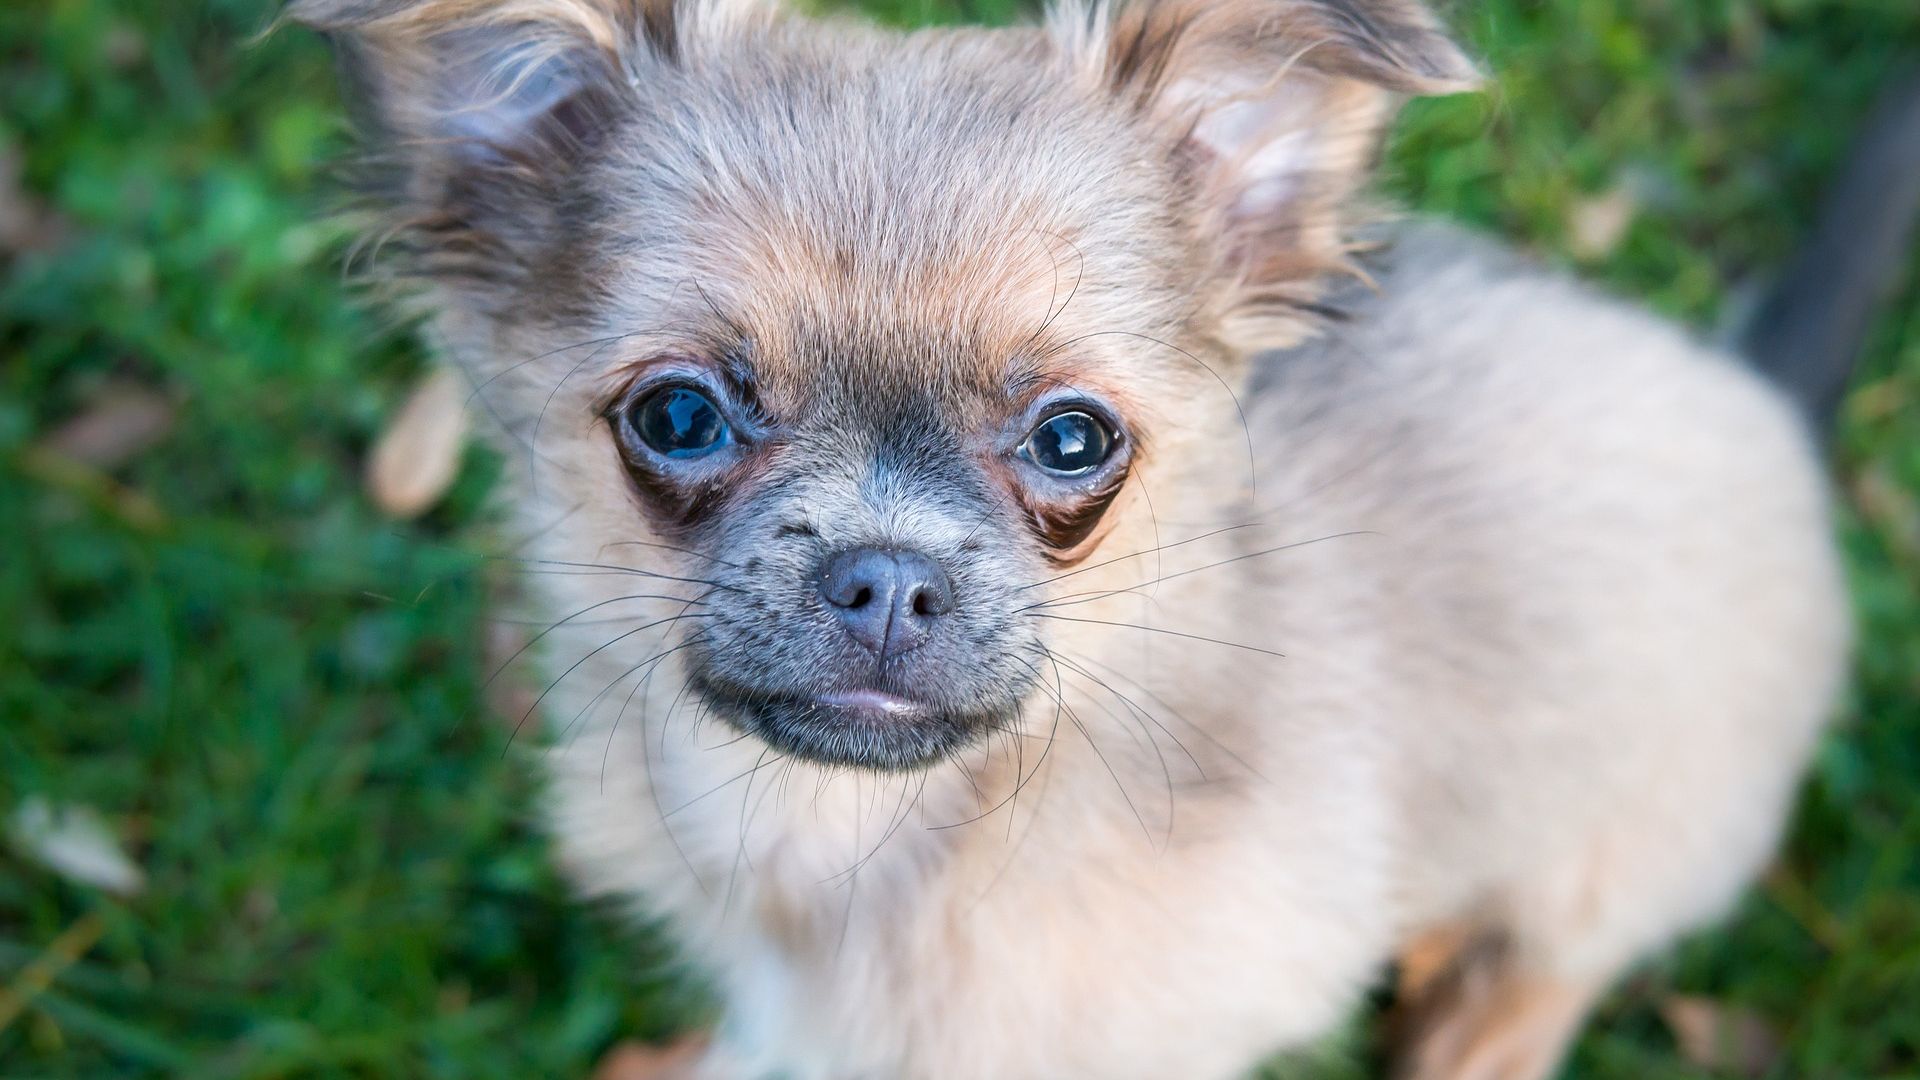 Desktop Wallpaper Cute Chihuahua Puppy, Pet Animal, Hd Image, Picture, Background, Vxkpy